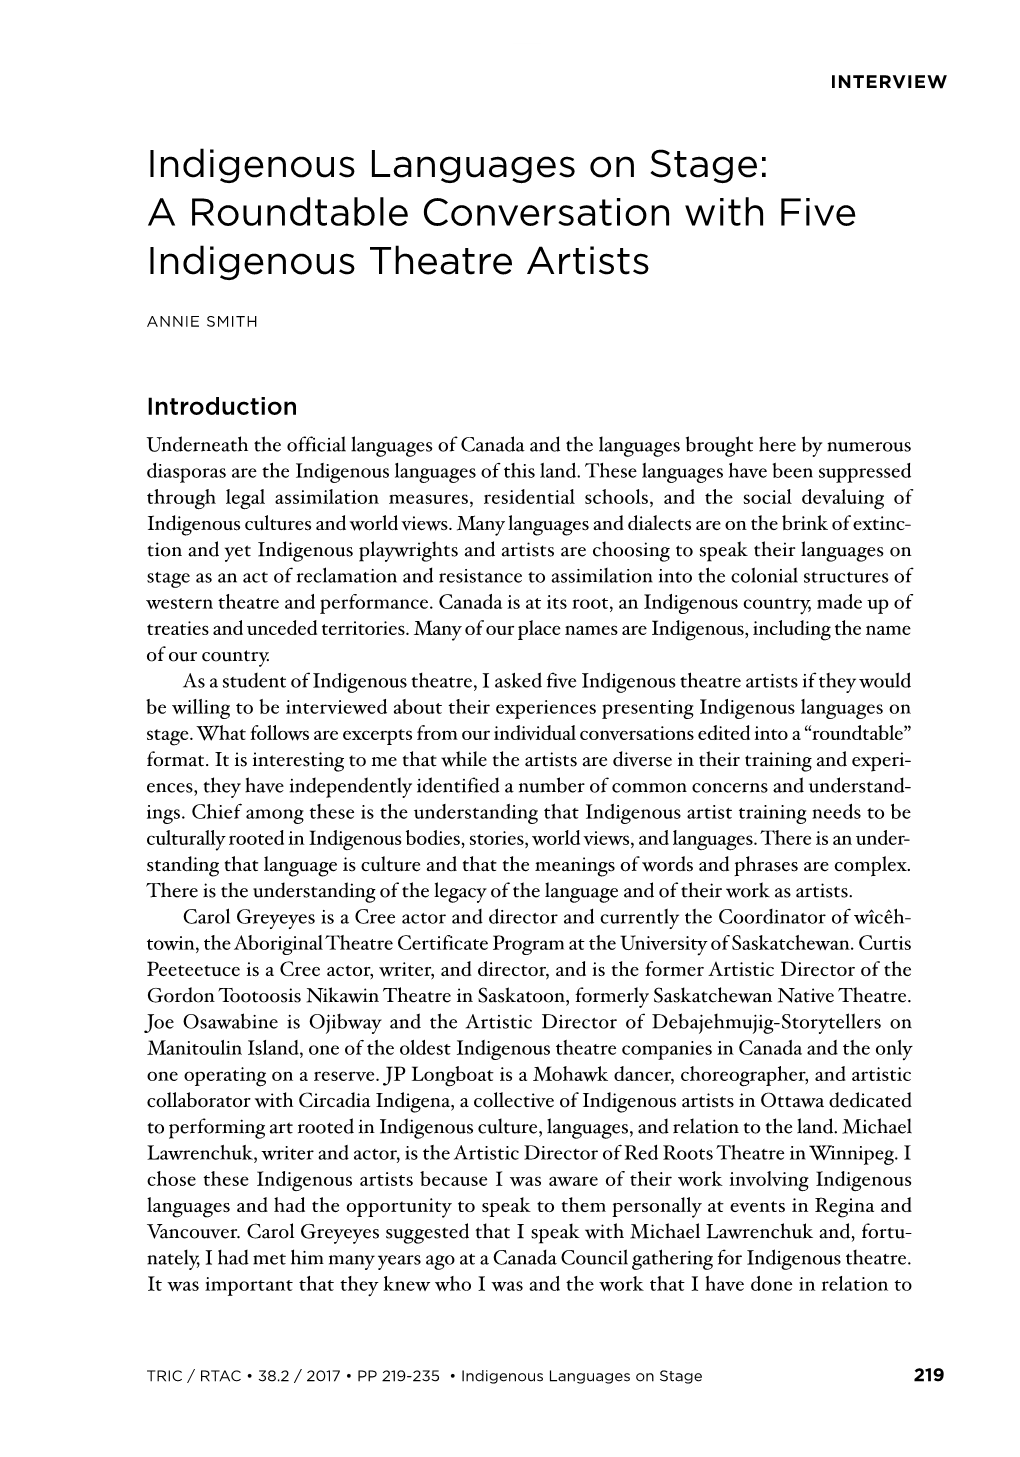 Indigenous Languages on Stage: a Roundtable Conversation with Five Indigenous Theatre Artists